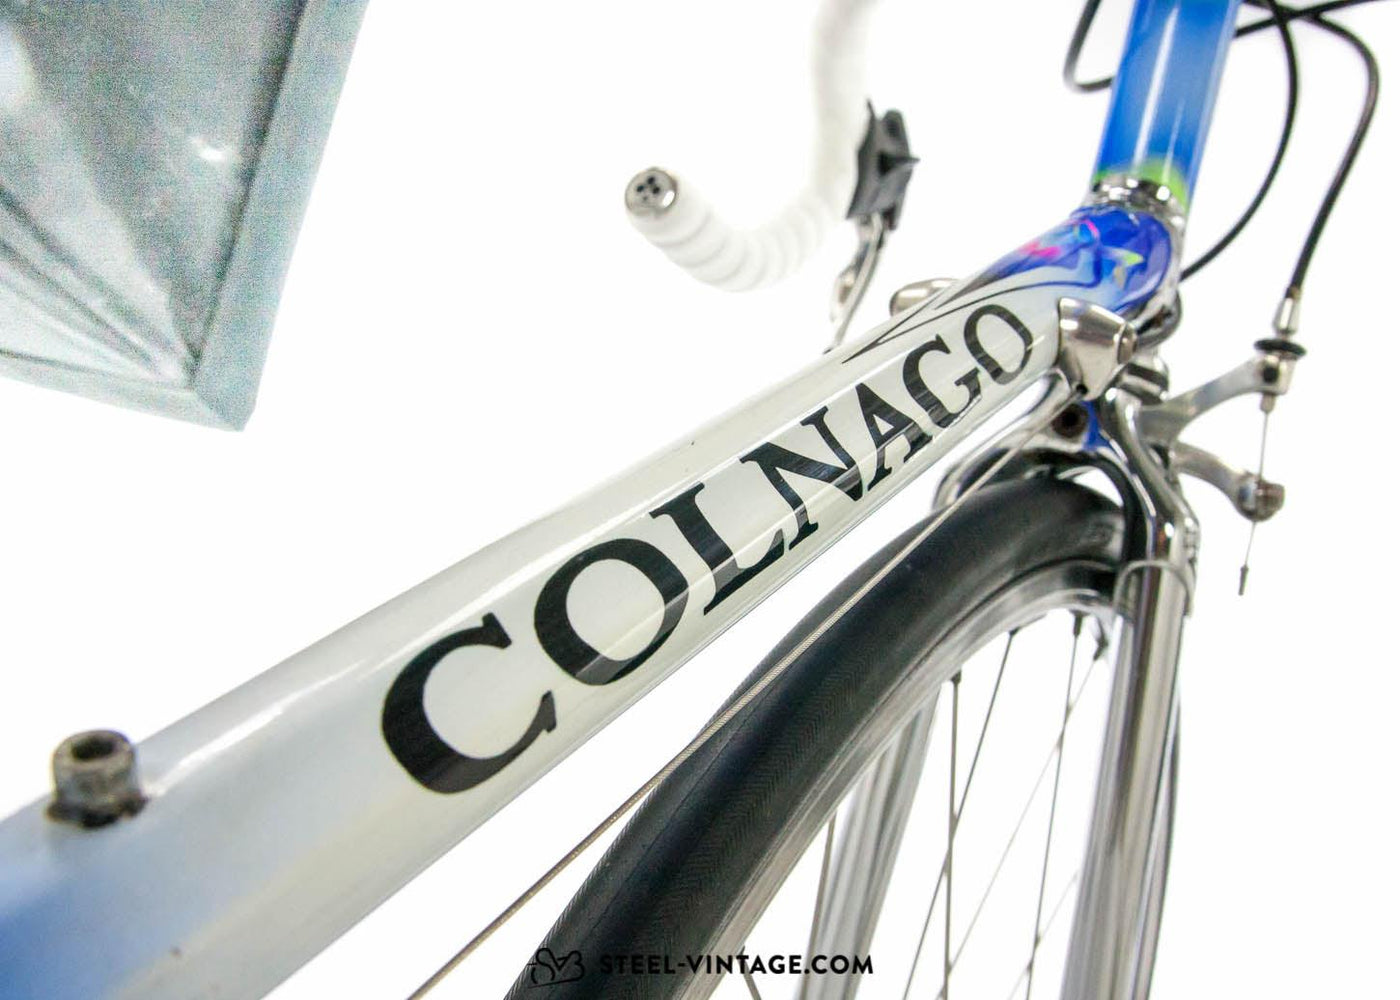 Colnago Master Olympic Classic Road Bicycle 1990s - Steel Vintage Bikes